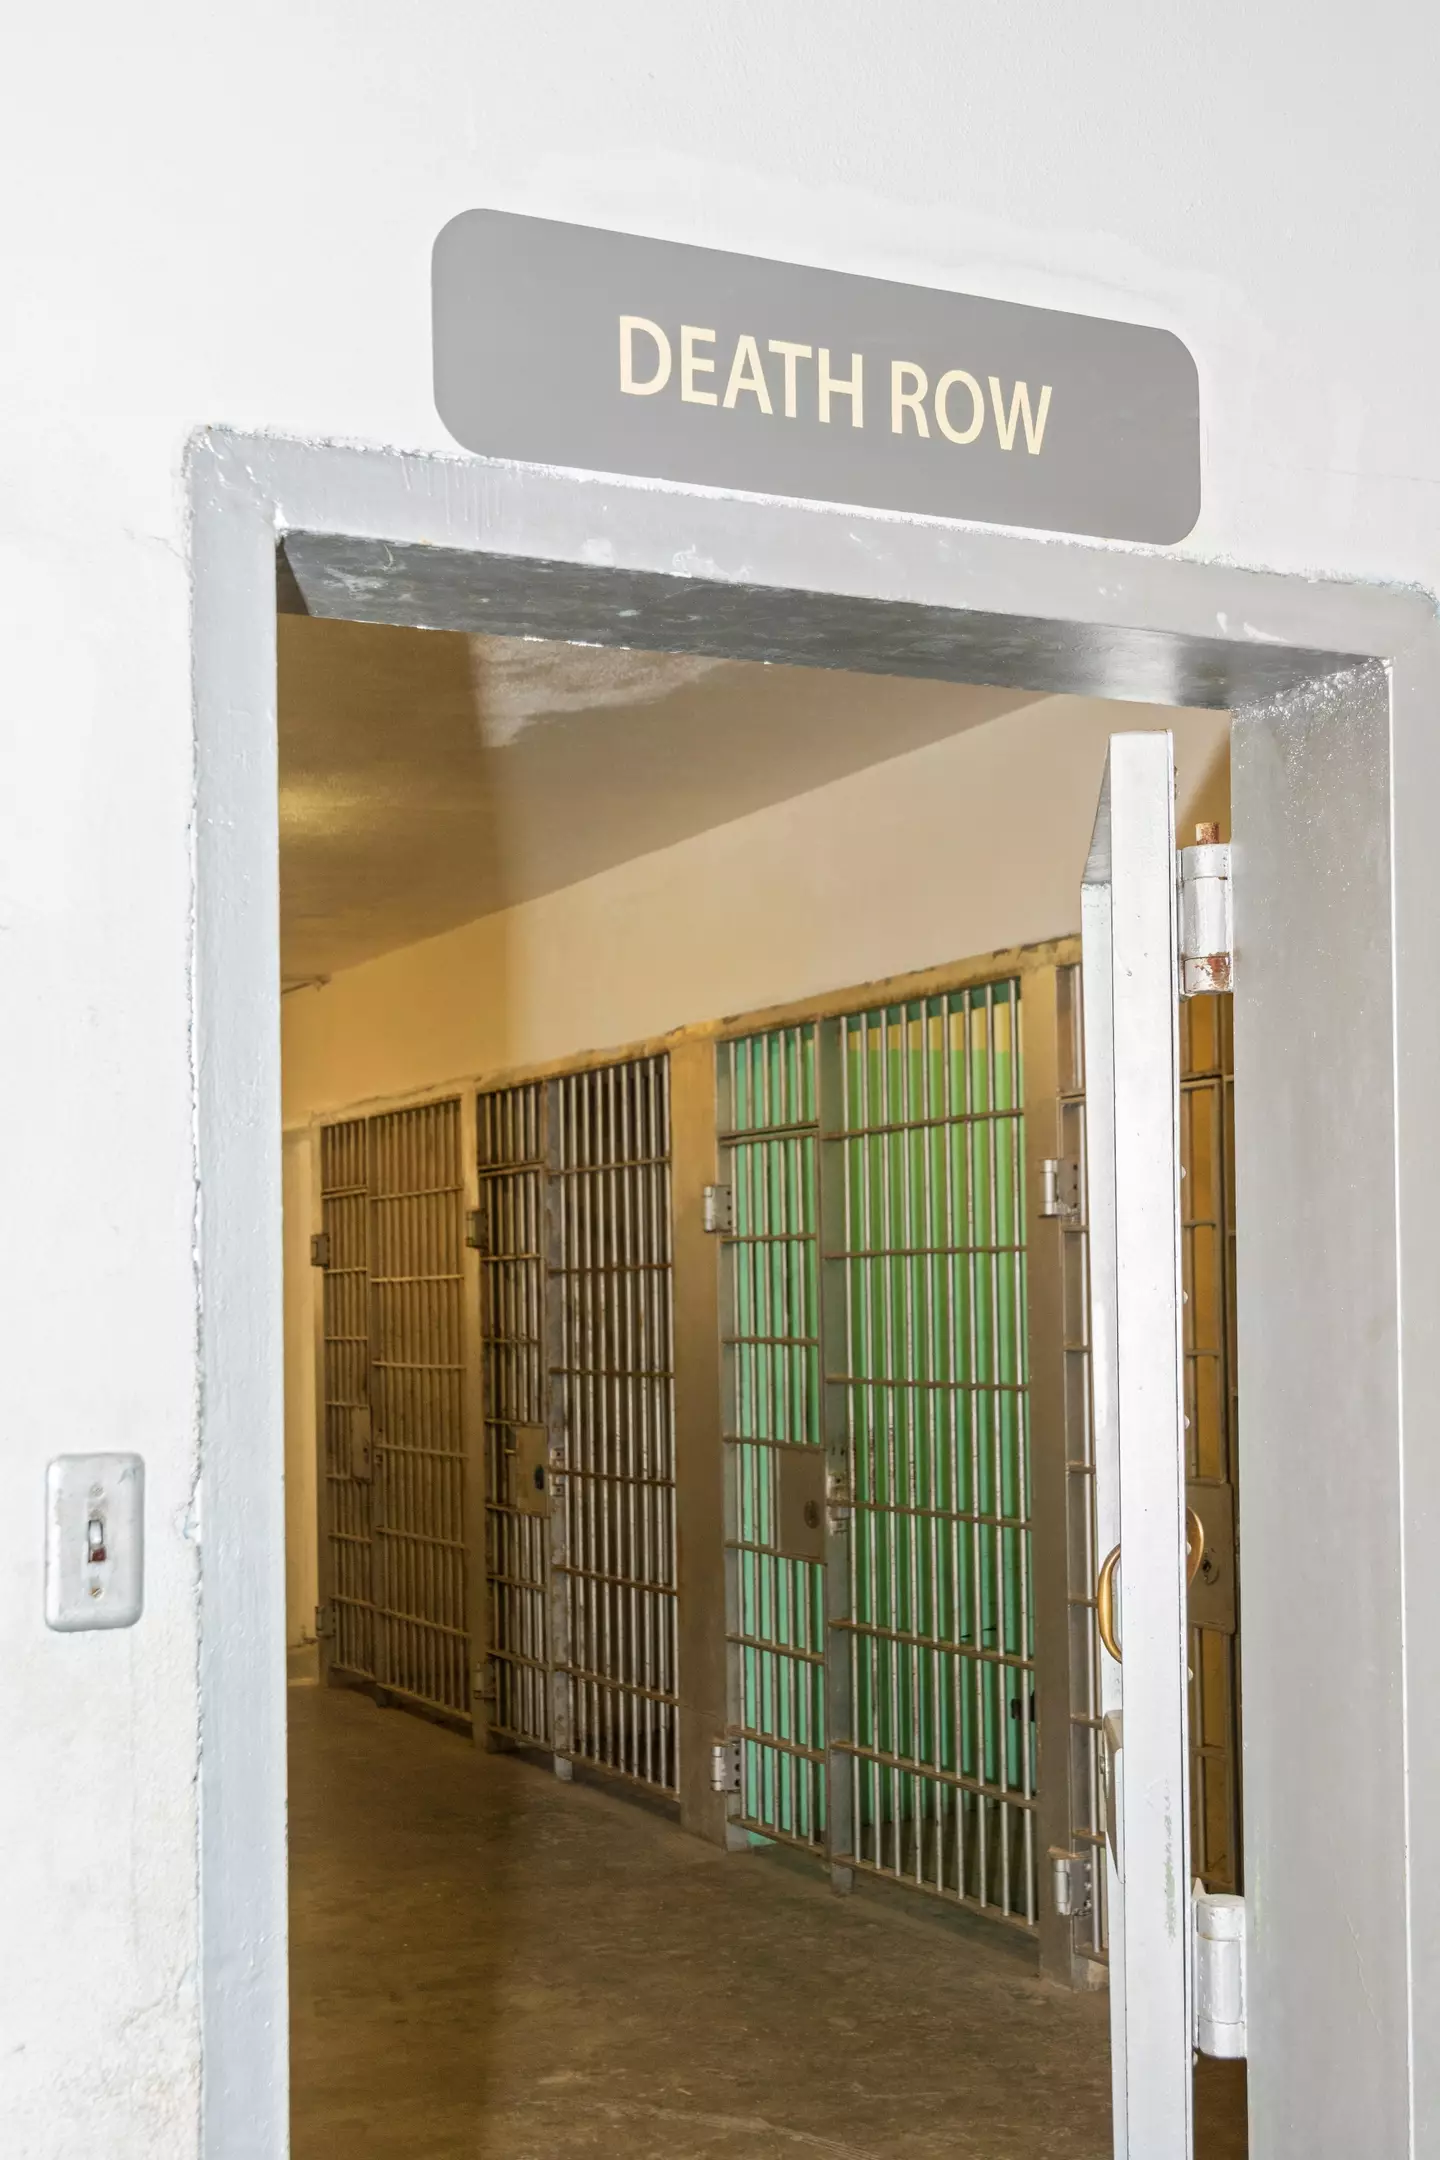 Frank Atwood has been on death row since 1984.